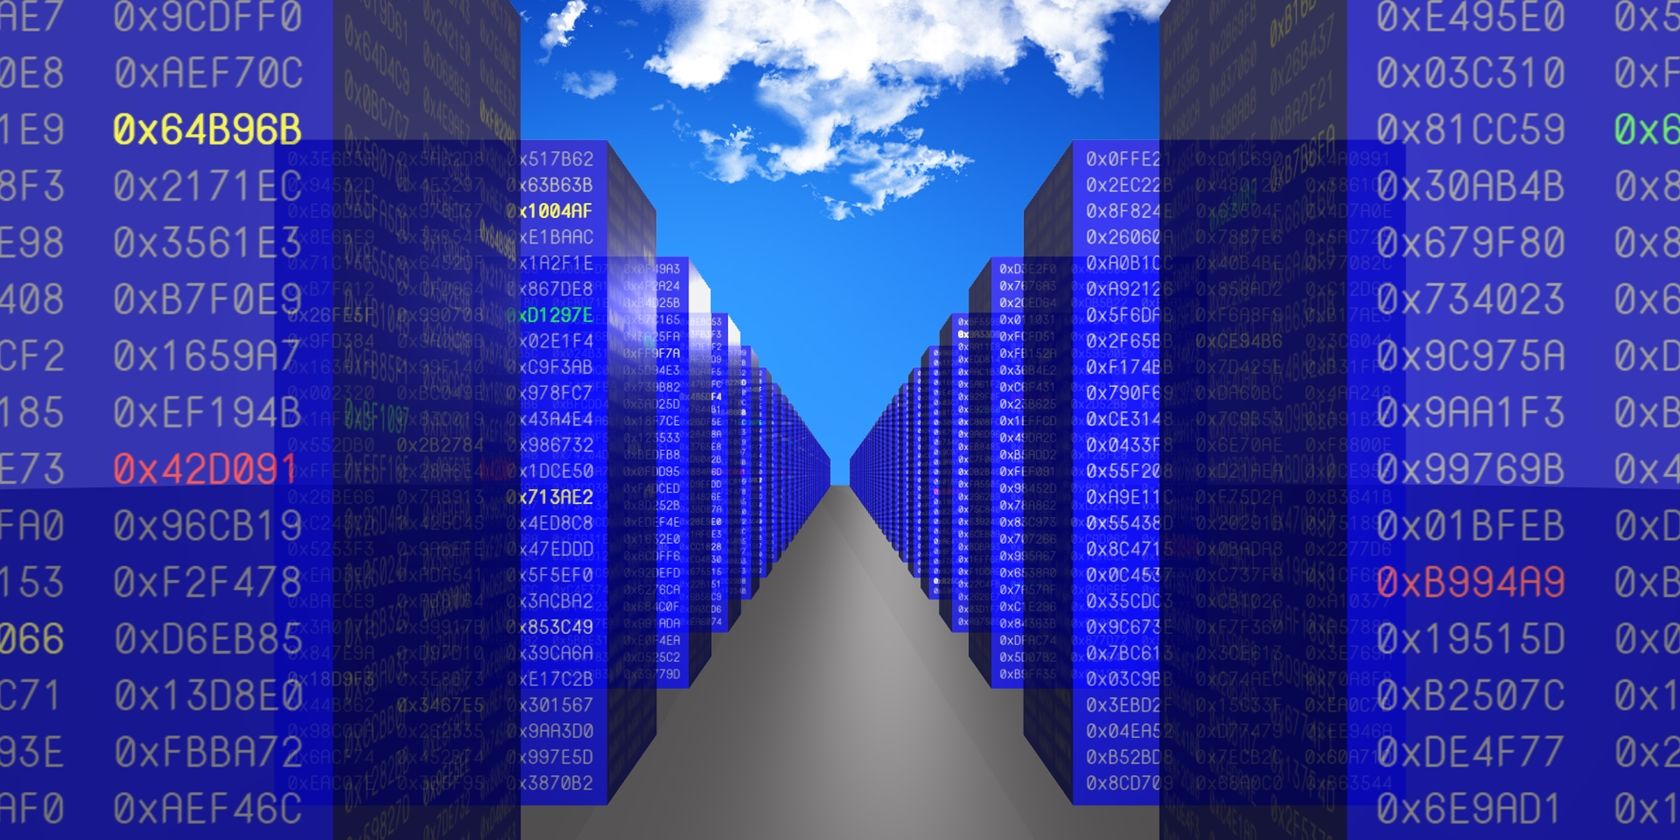 Image depicting servers in a cloud background.